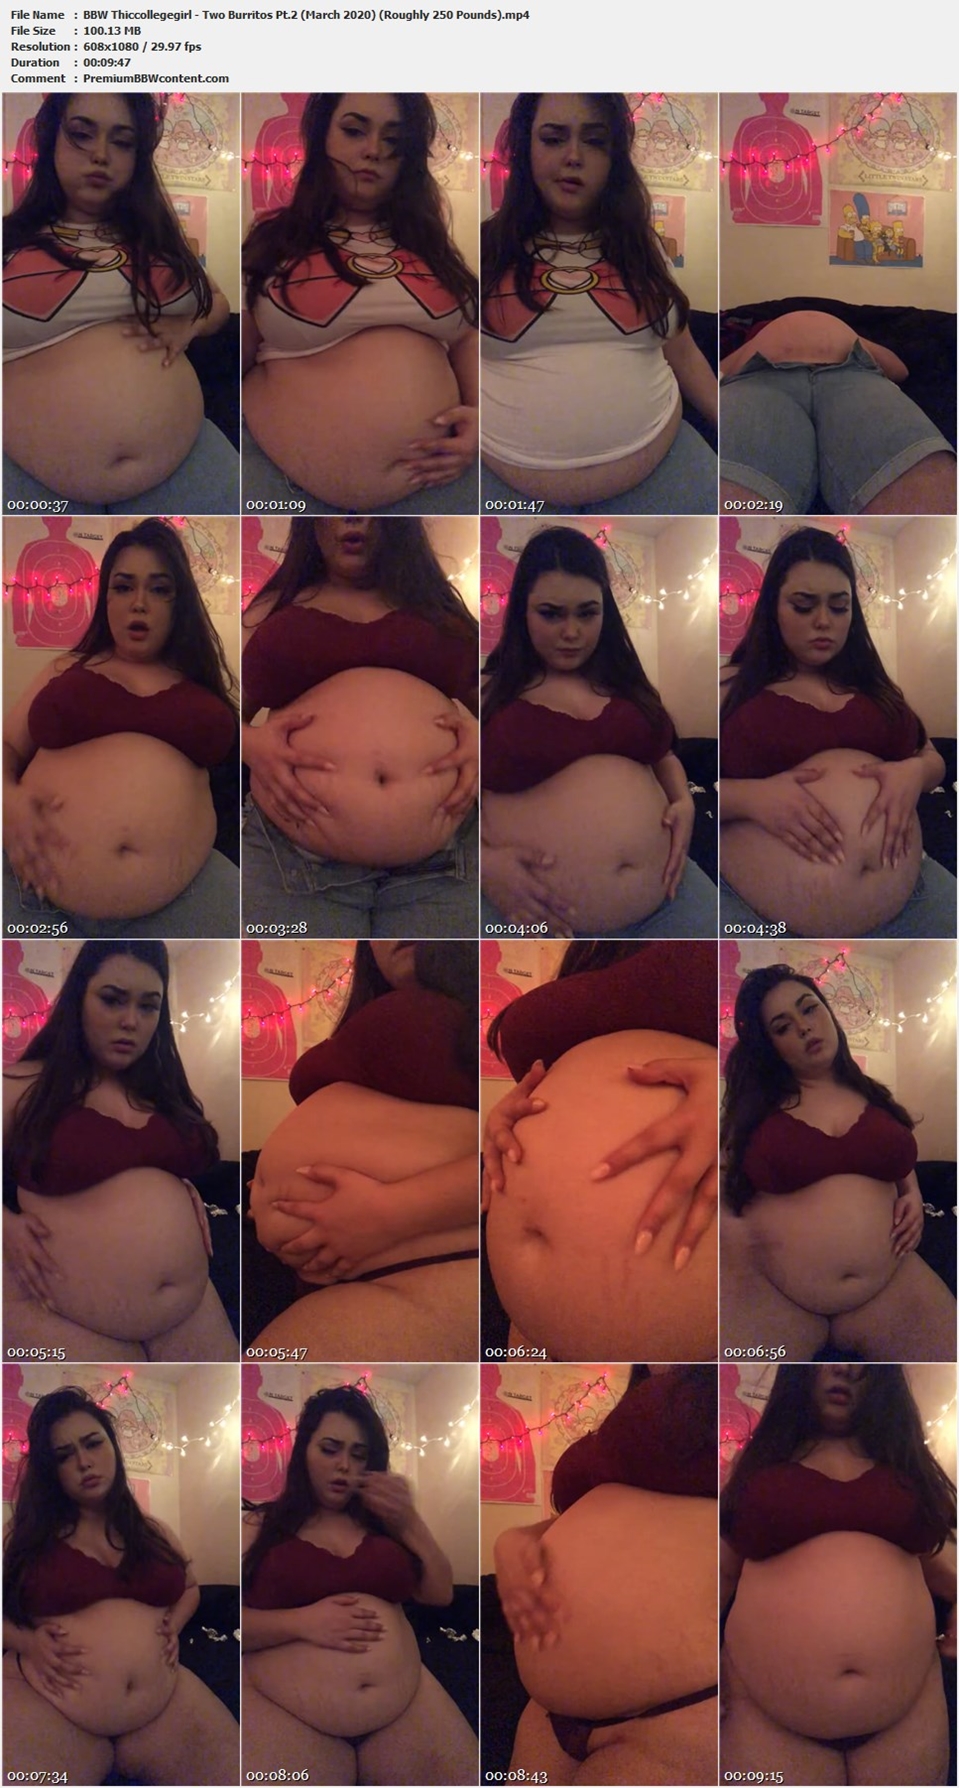 960px x 1788px - BBW Thiccollegegirl - Two Burritos Pt.2 (March 2020) (Roughly 250 Pounds)